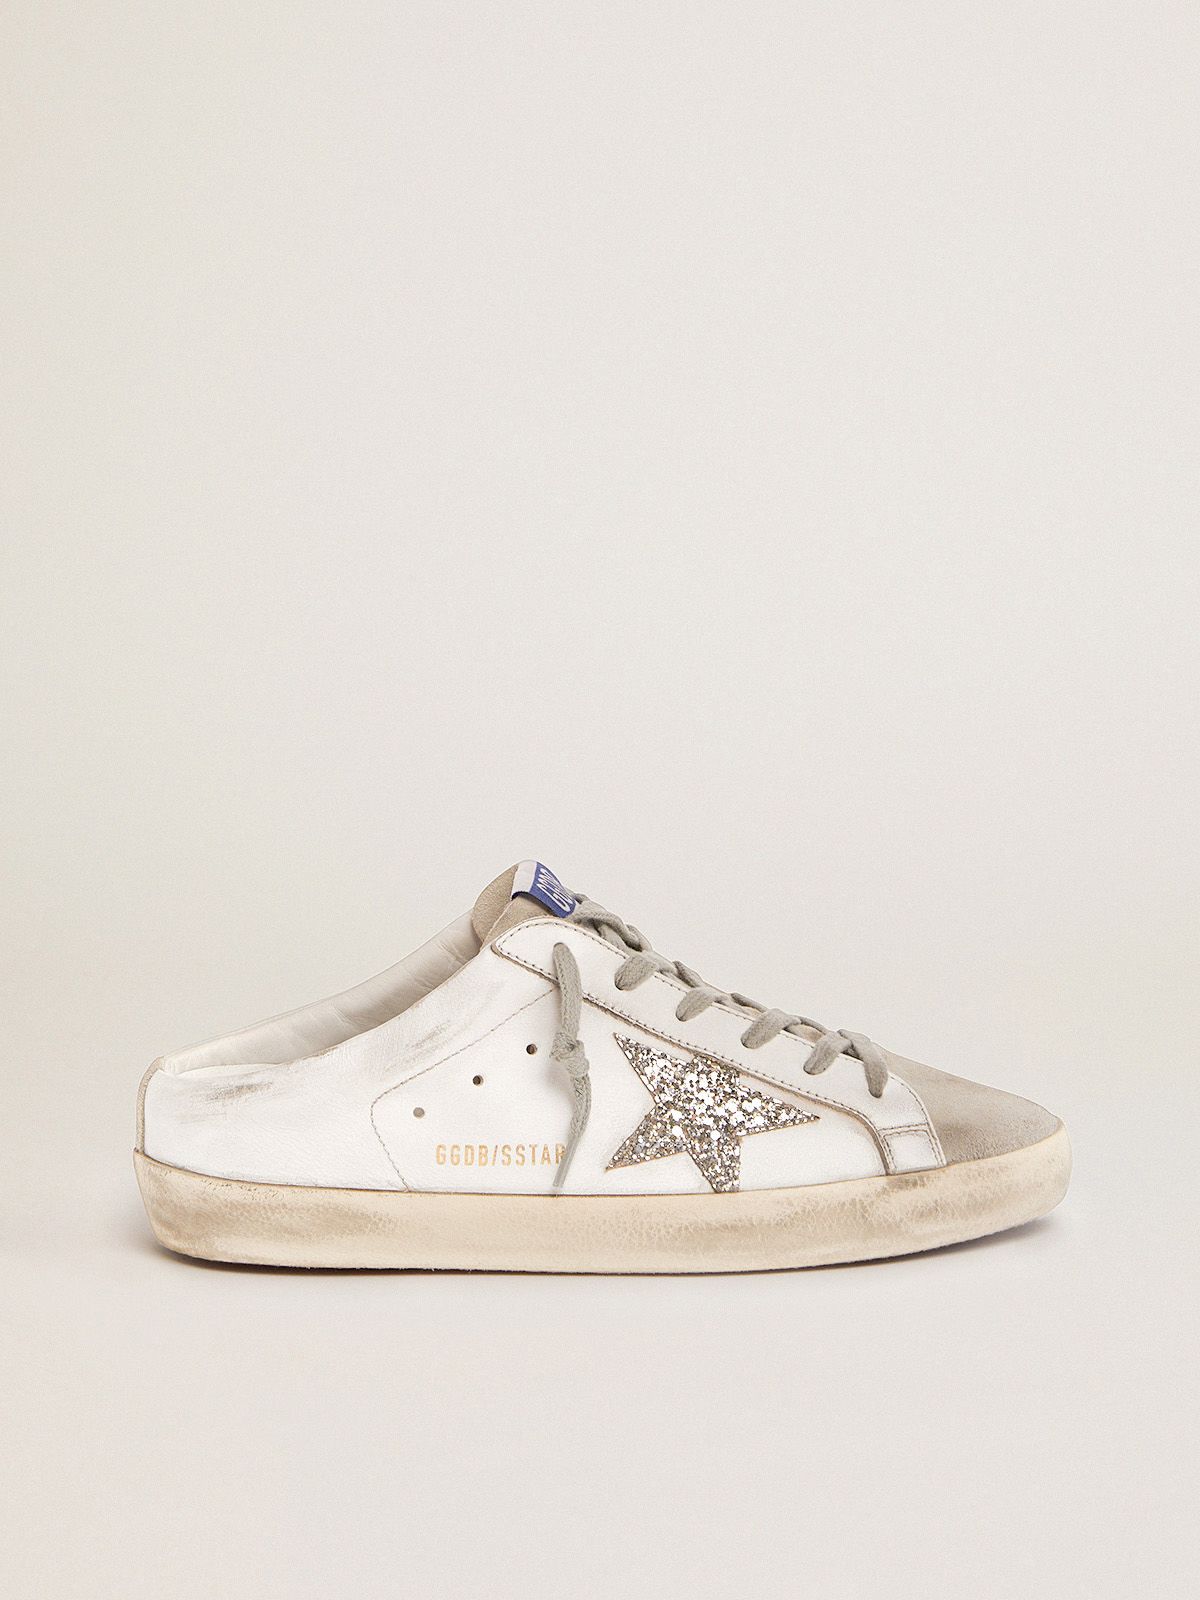 Sneakers Uomo Golden Goose Super-Star Sabots in white leather and gray suede with silver glitter star